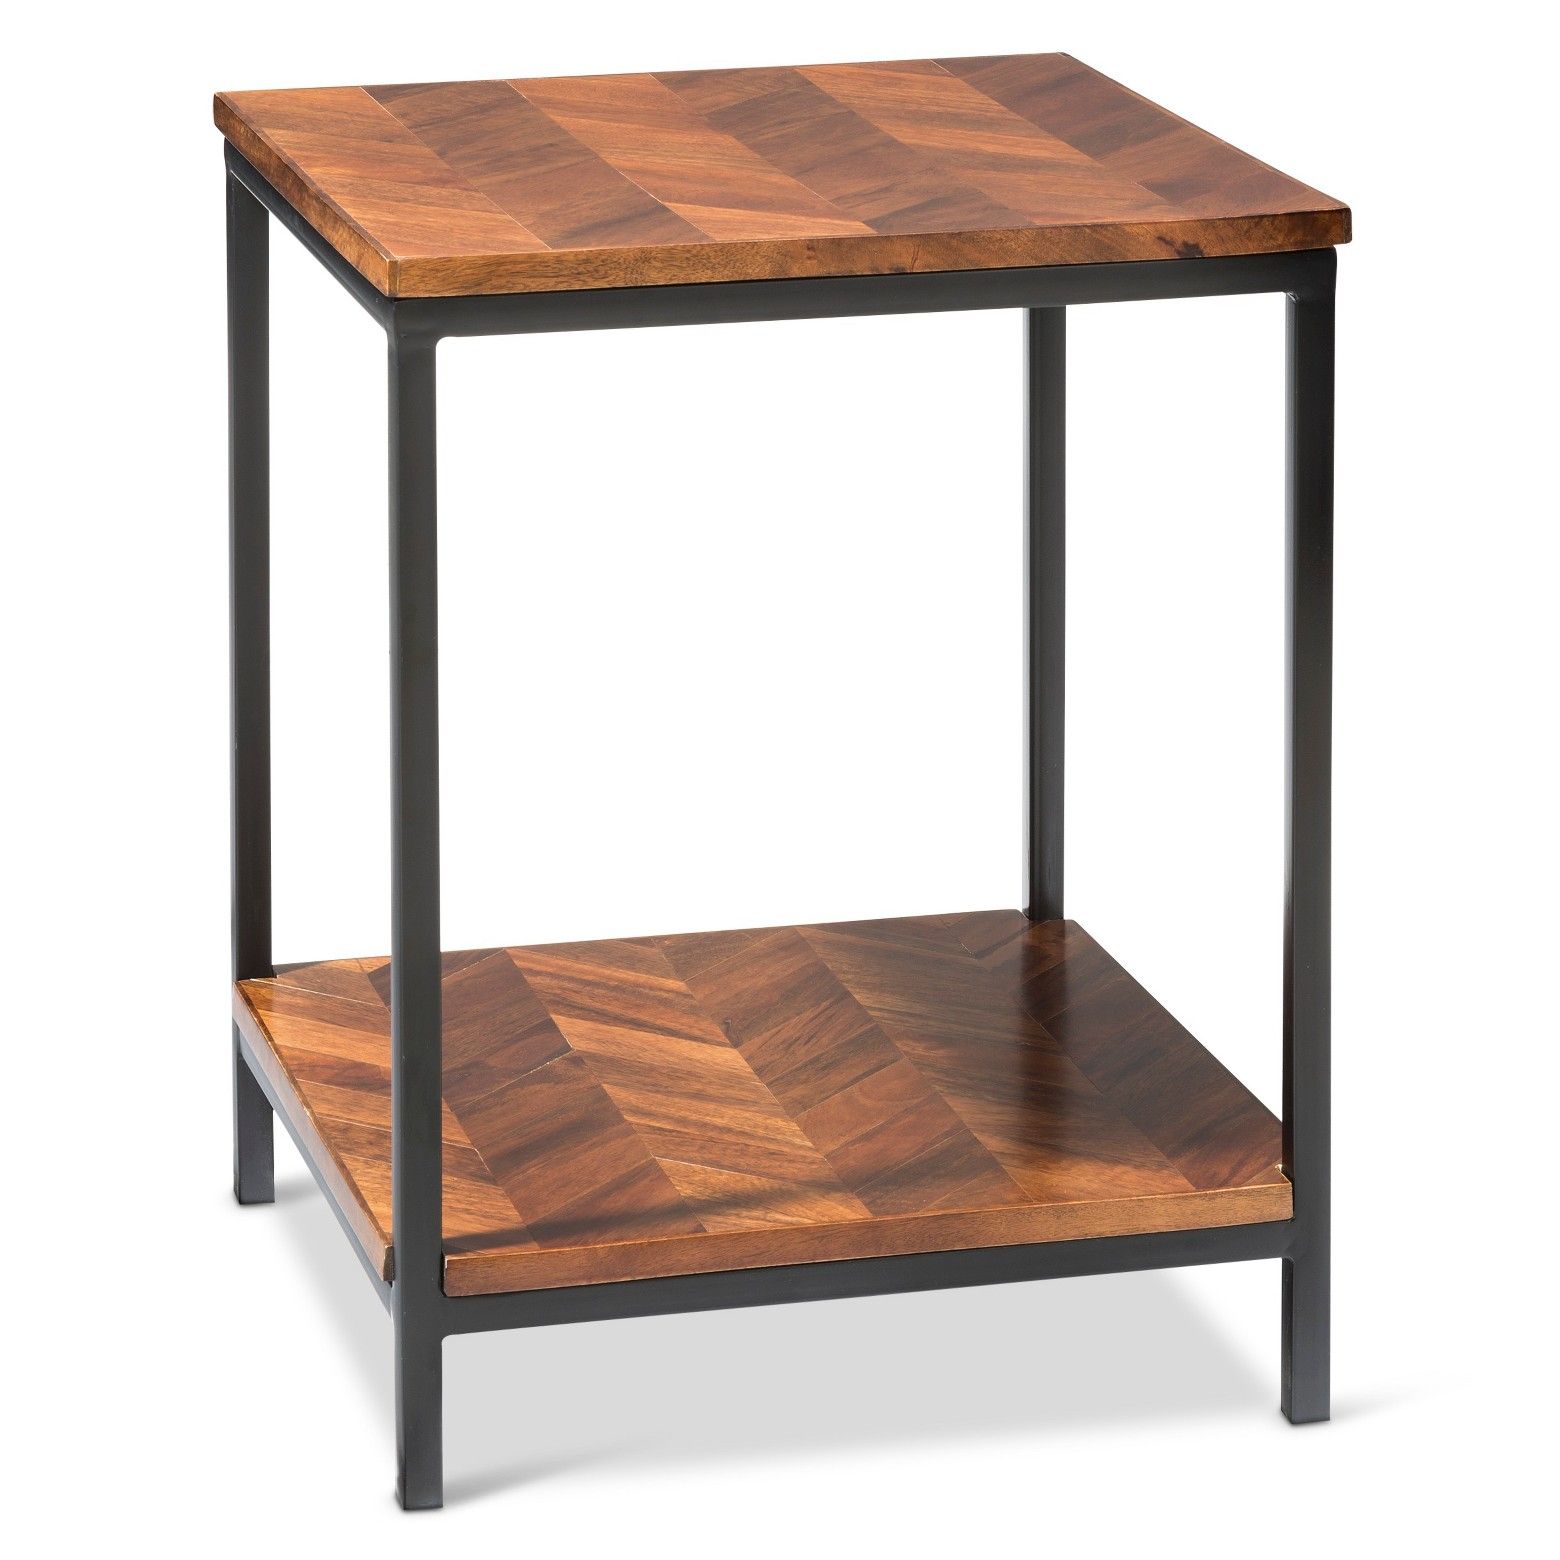 bull industrial chic stylebrbullnbspwalnut stained parquet accent table target wood top with black metal basebrbull sturdy designbrbull integrated shelf for nook plus kirklands